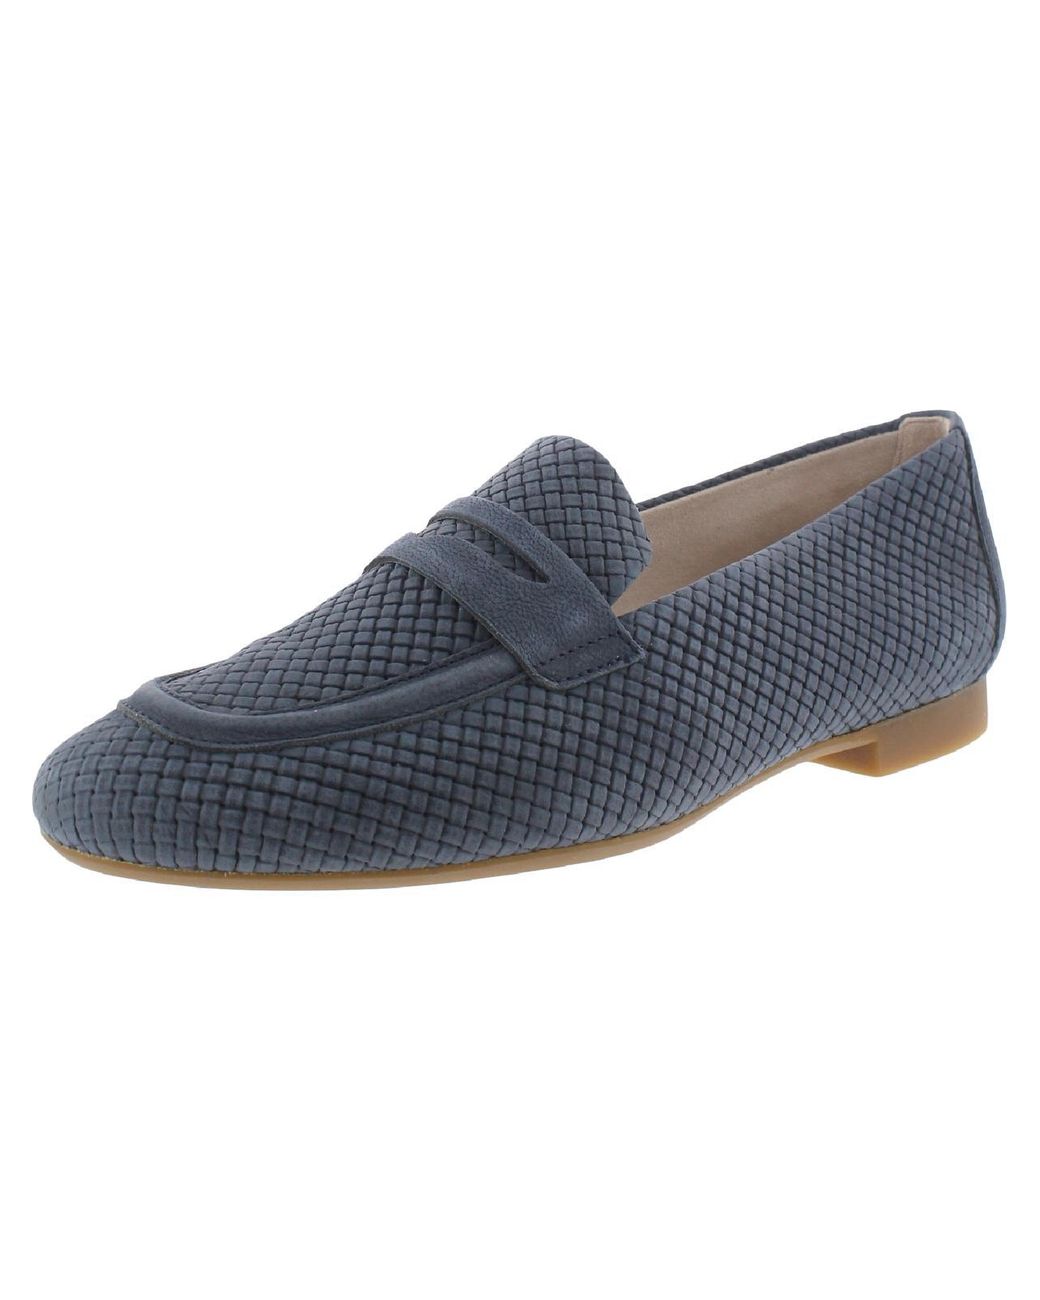 Paul Green Hudson Suede Slip On Loafers in Blue | Lyst